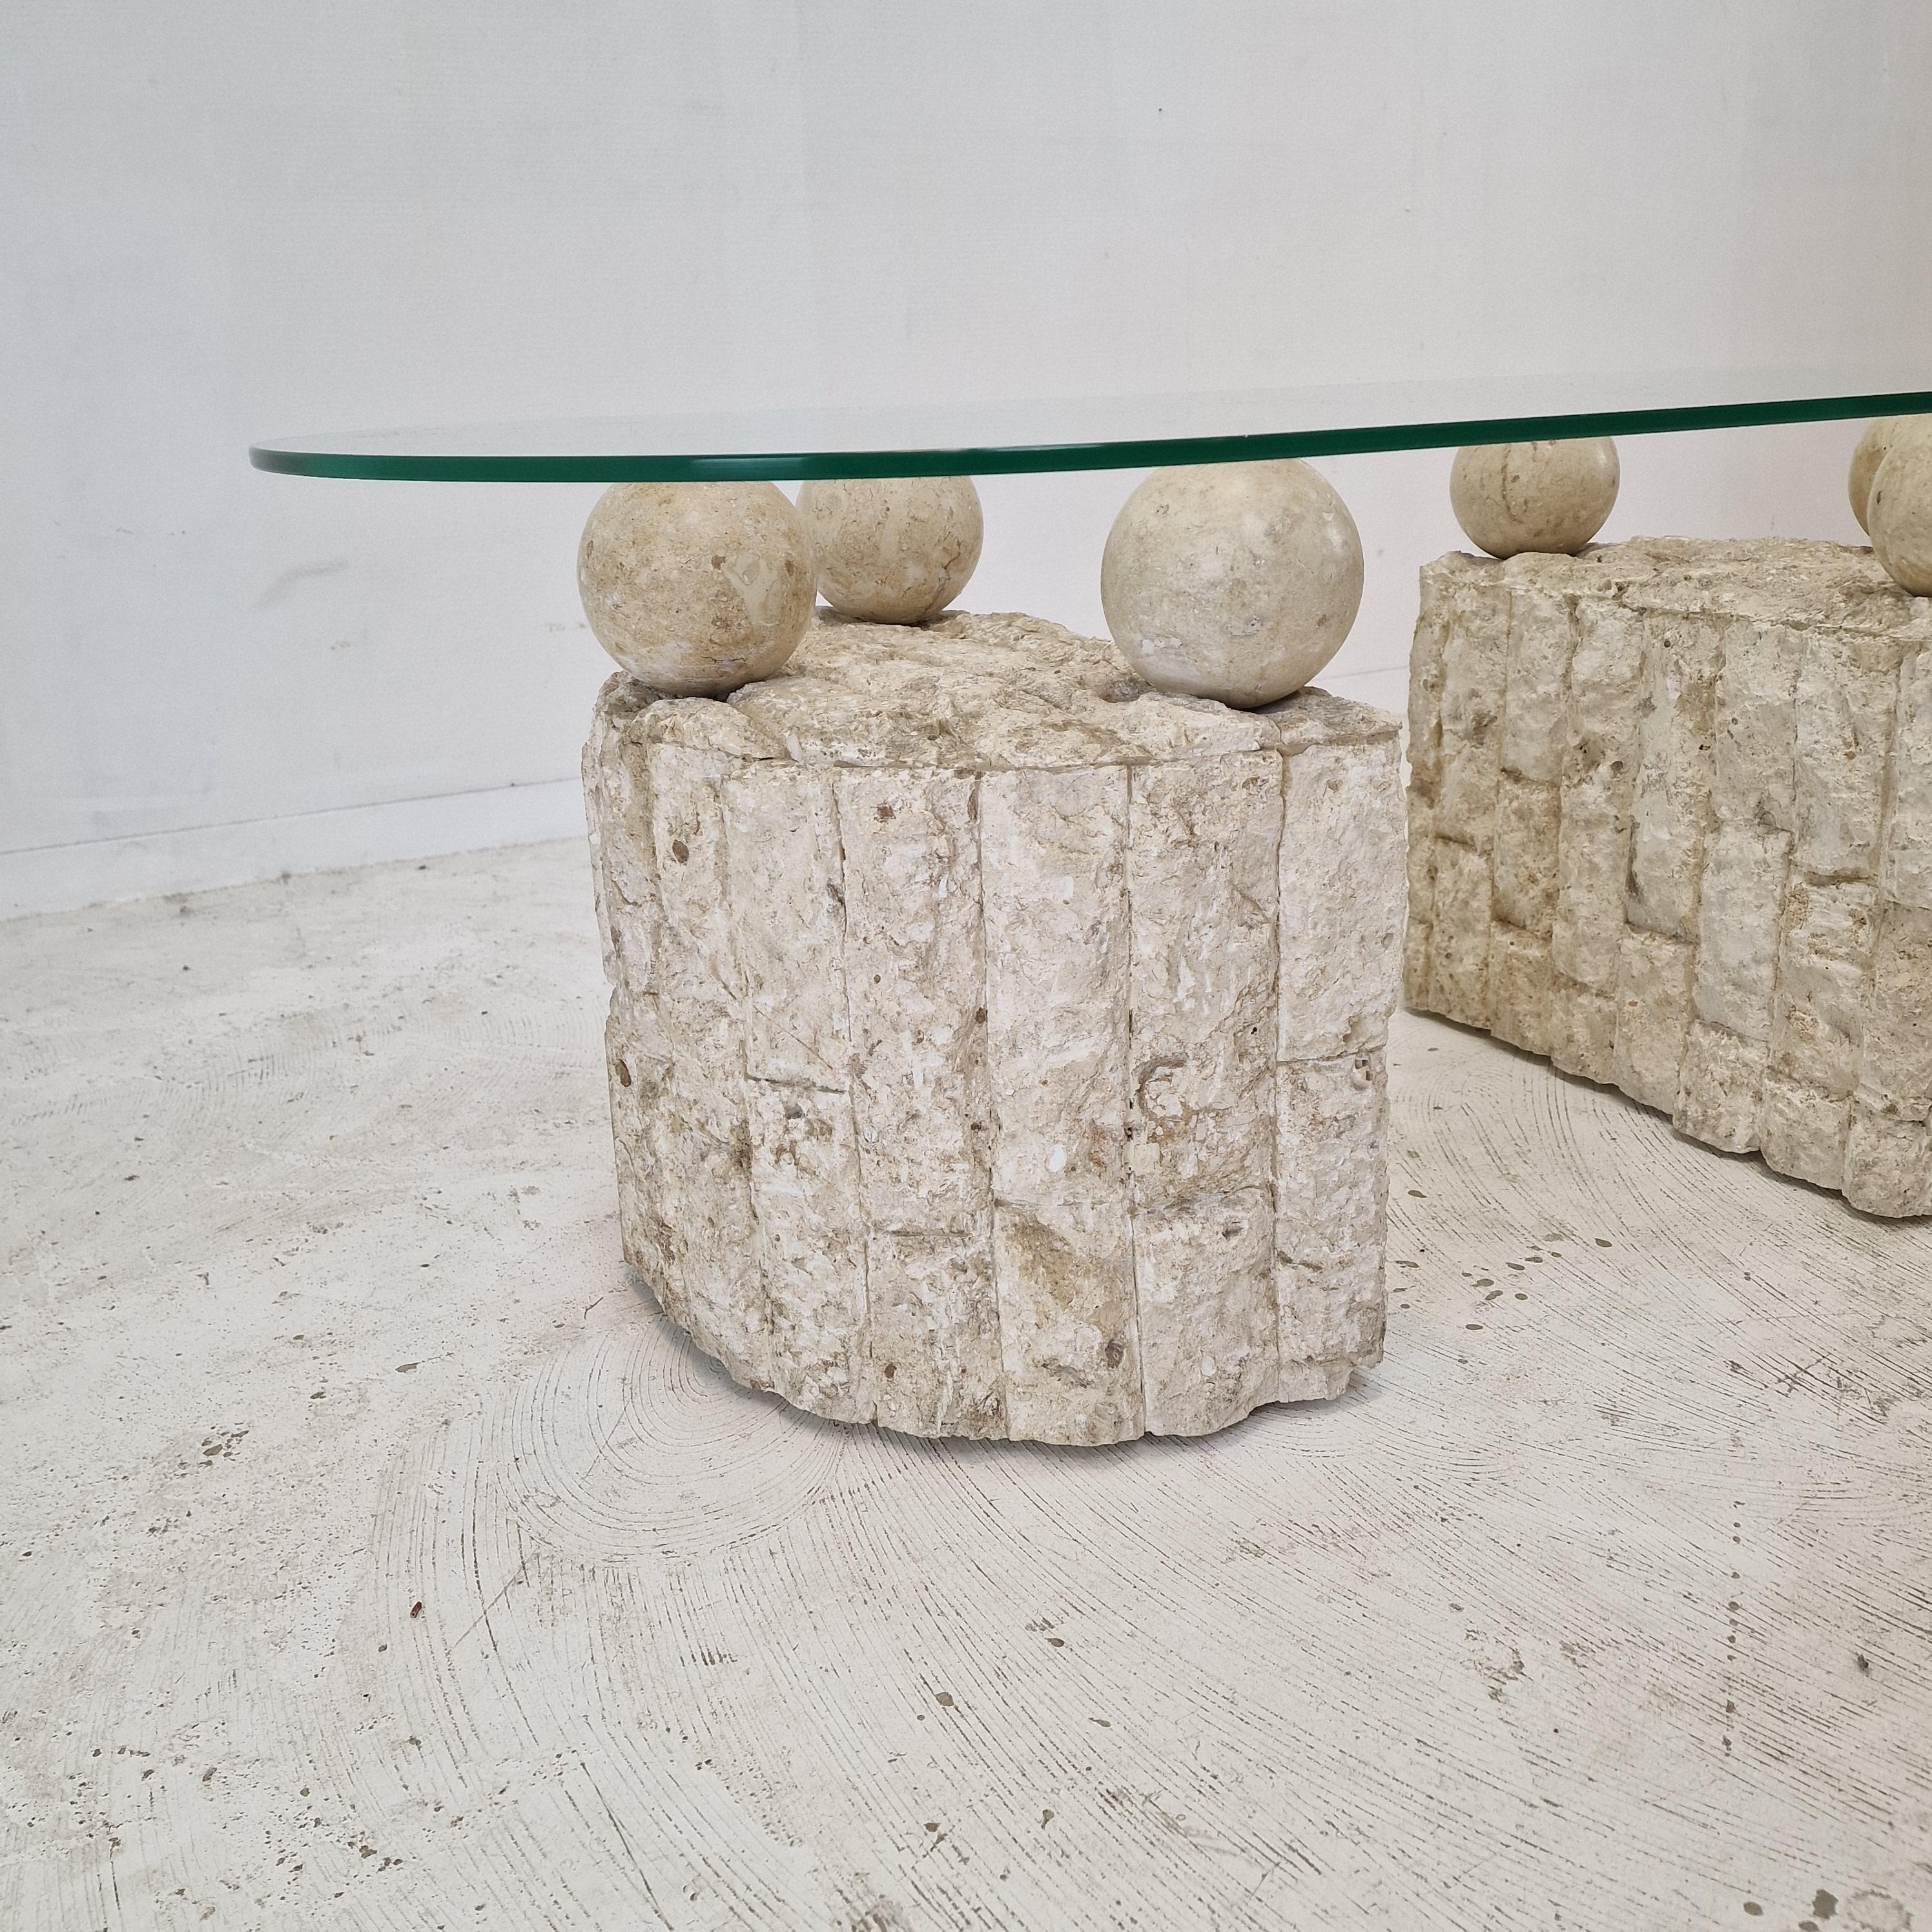 Magnussen Ponte Mactan Stone Coffee or Fossil Stone Table, 1980s For Sale 3